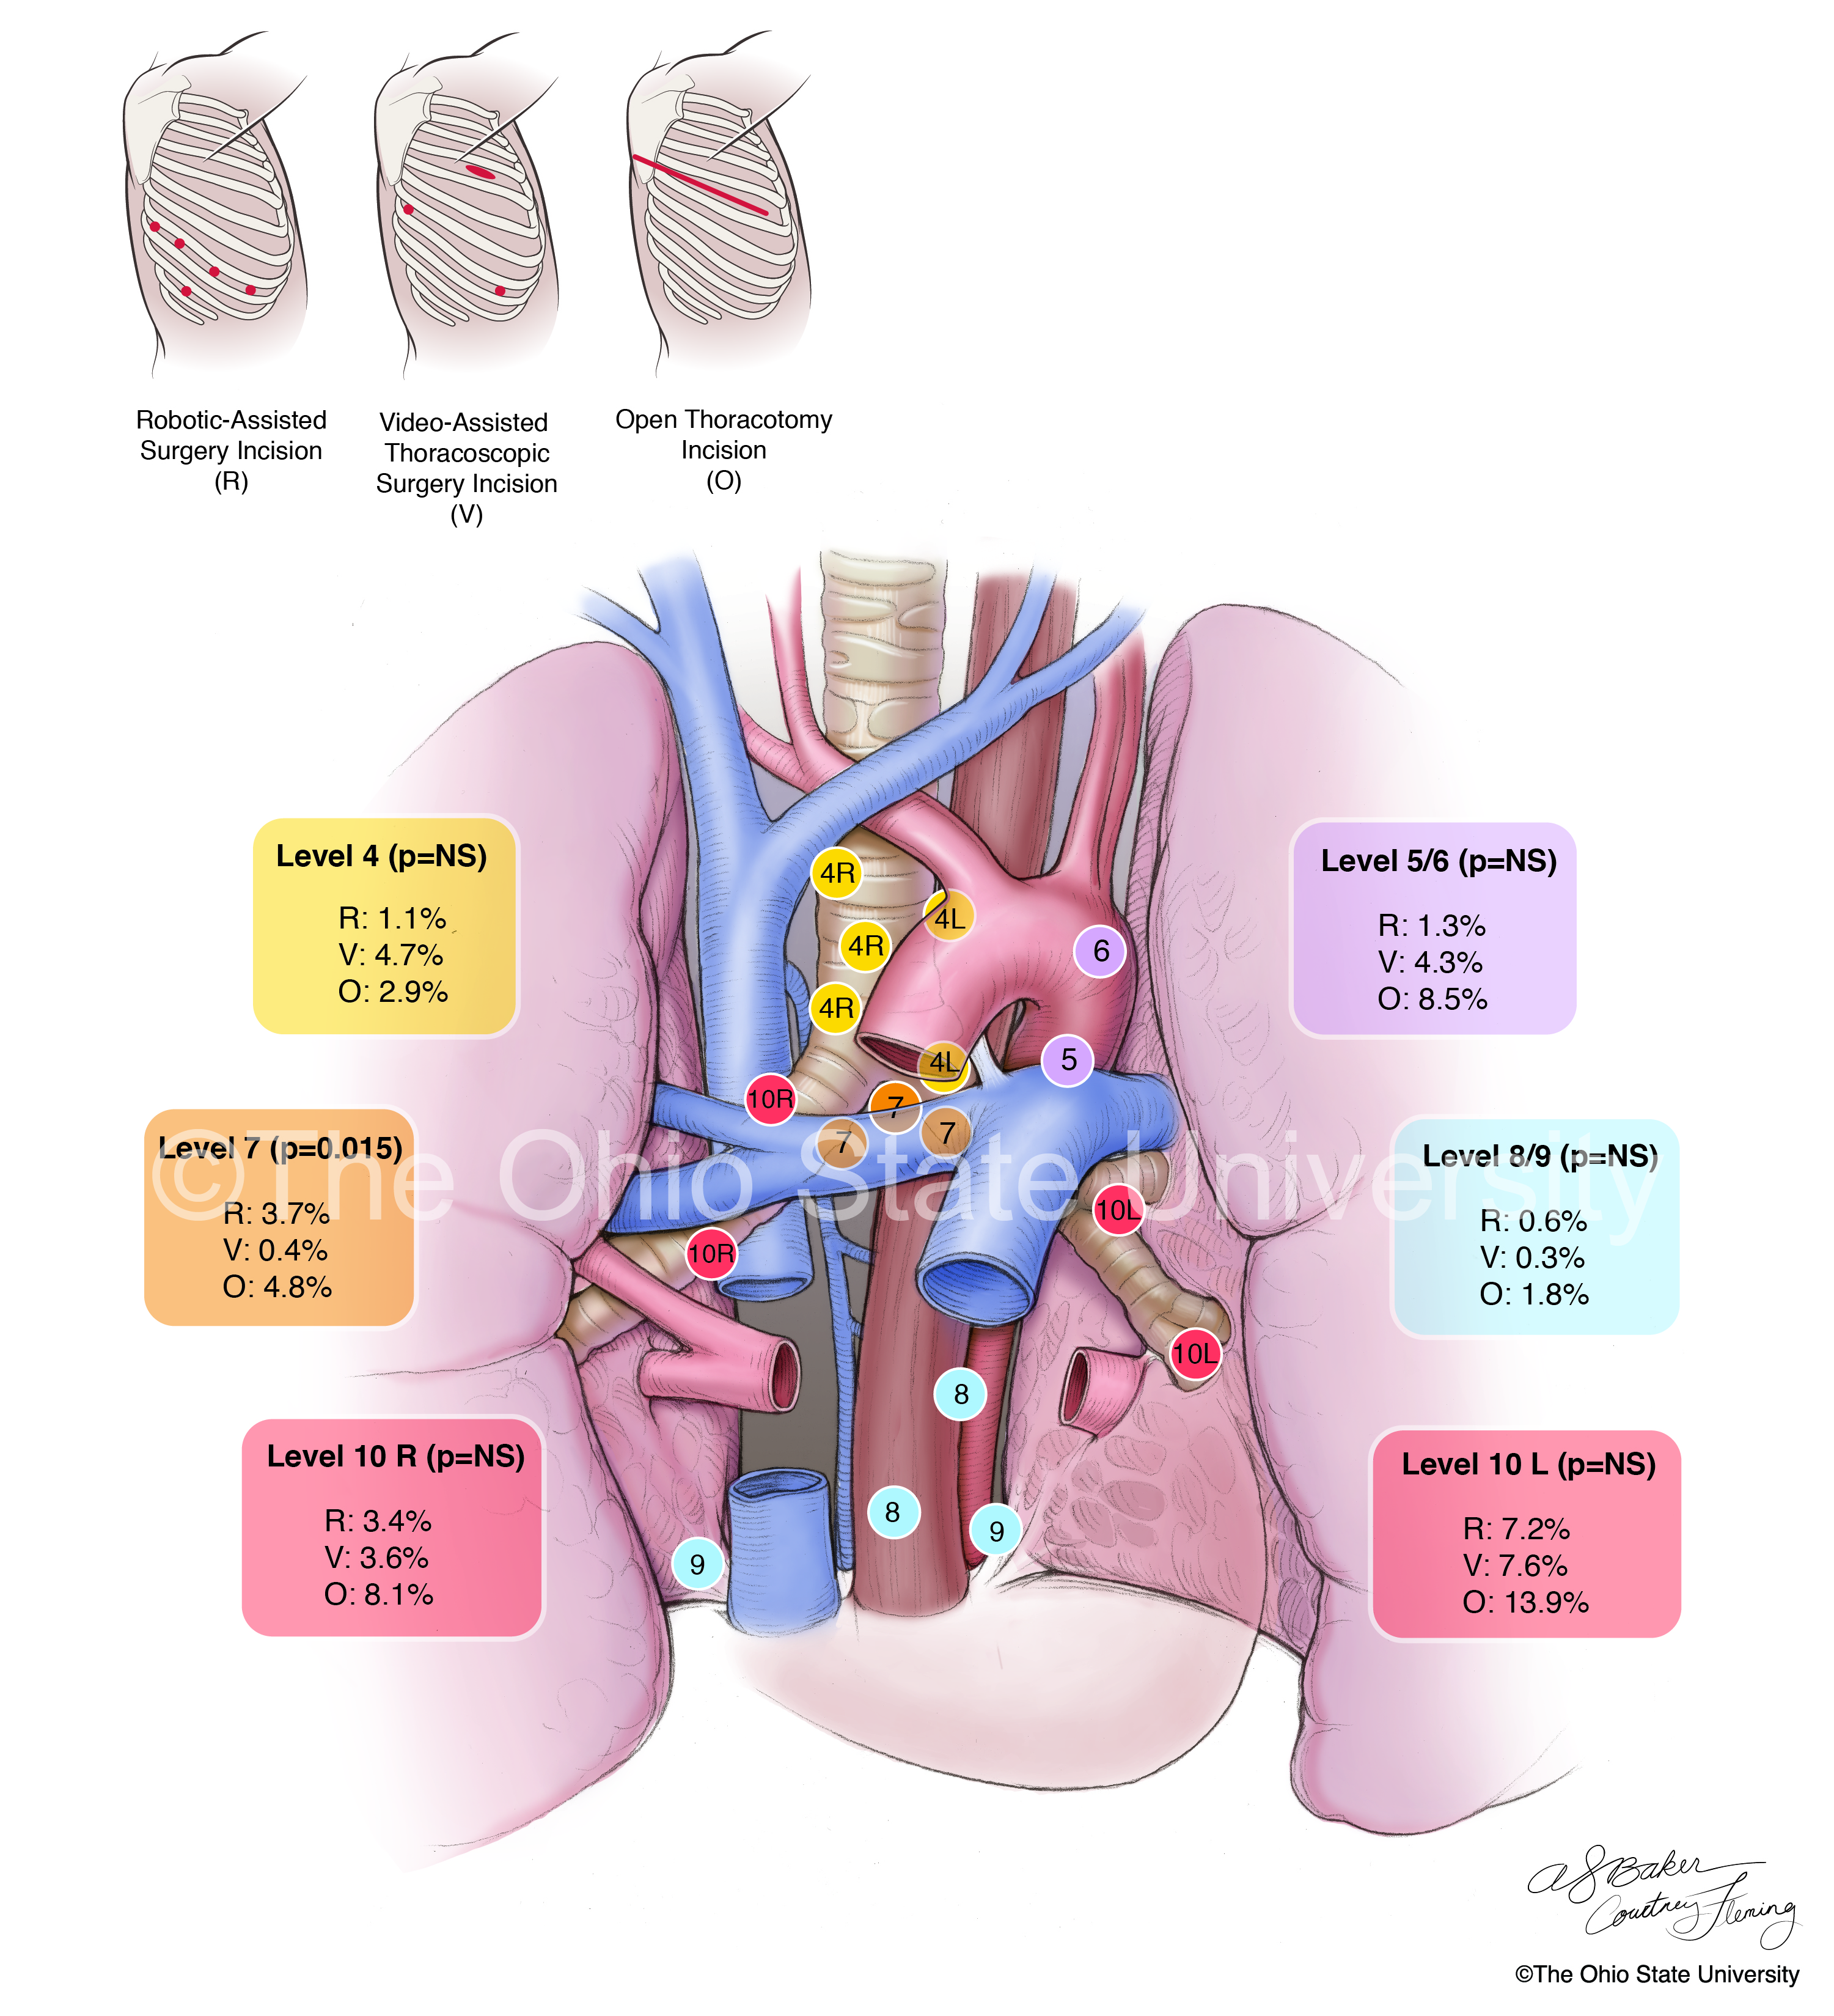 Moderate color surgical illustration, showing thoracic lymph node locations